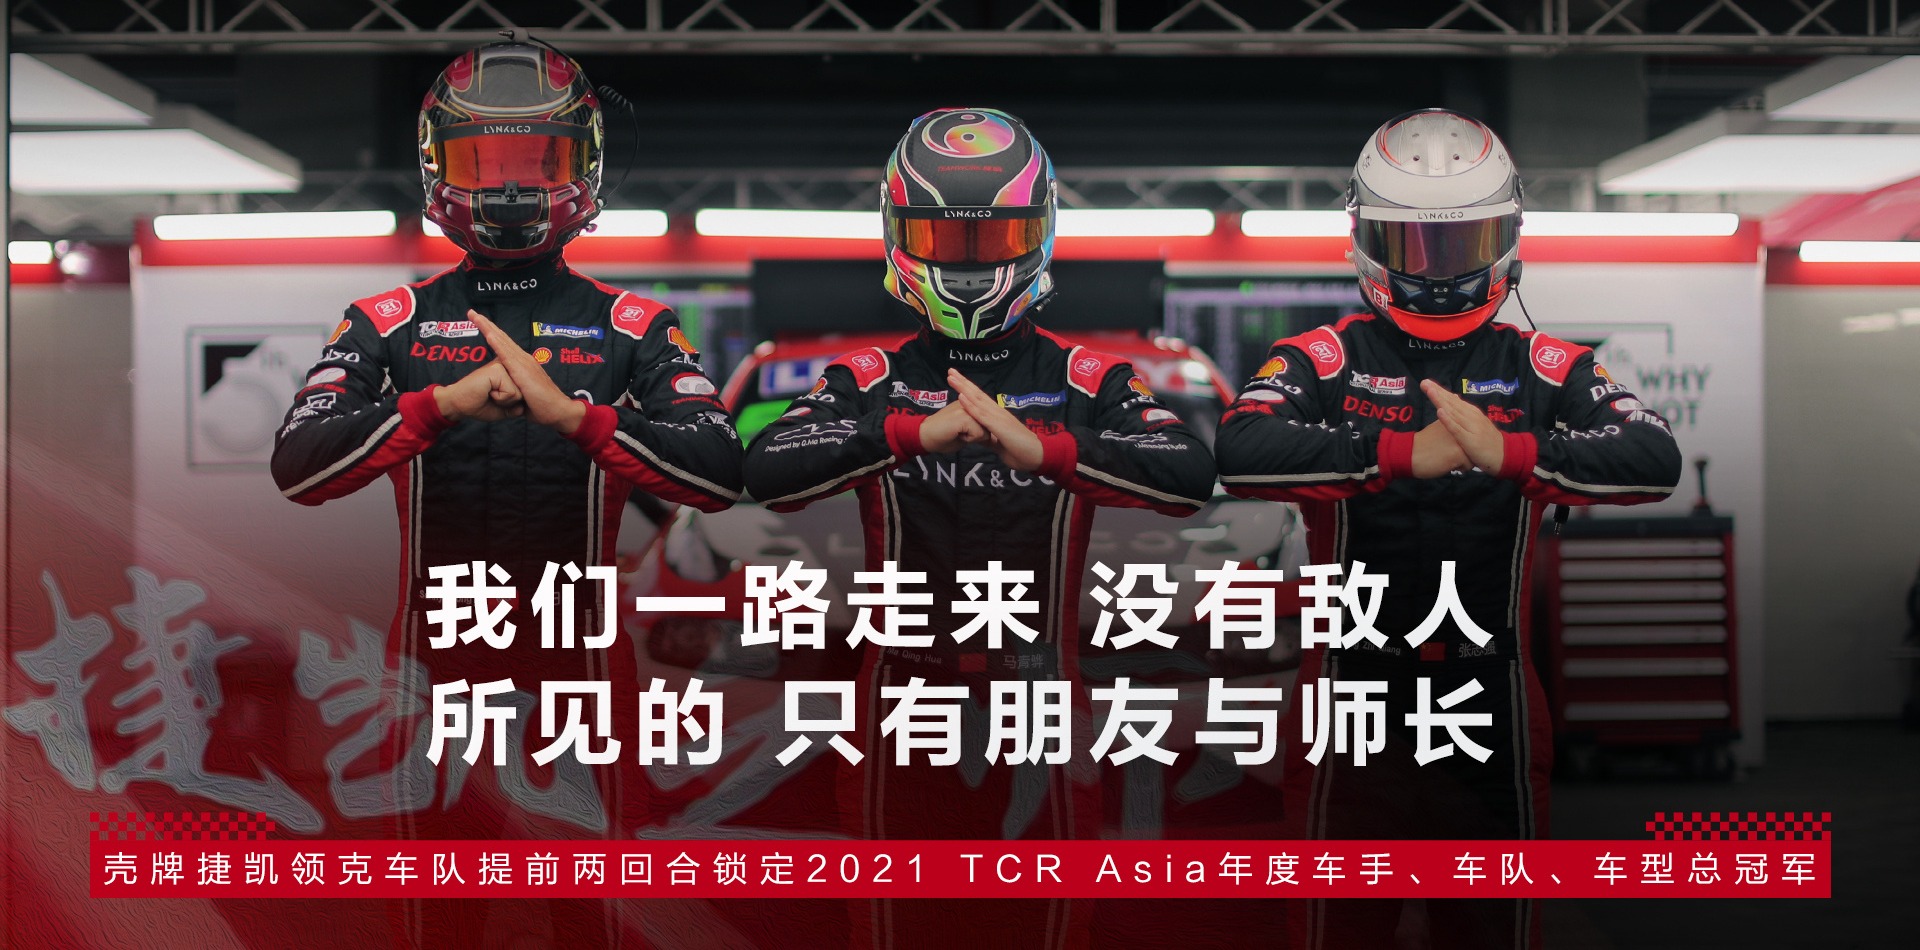 Read more about the article CHAMPIONS! Shell Teamwork Lynk & Co Racing secure all titles at Tianma